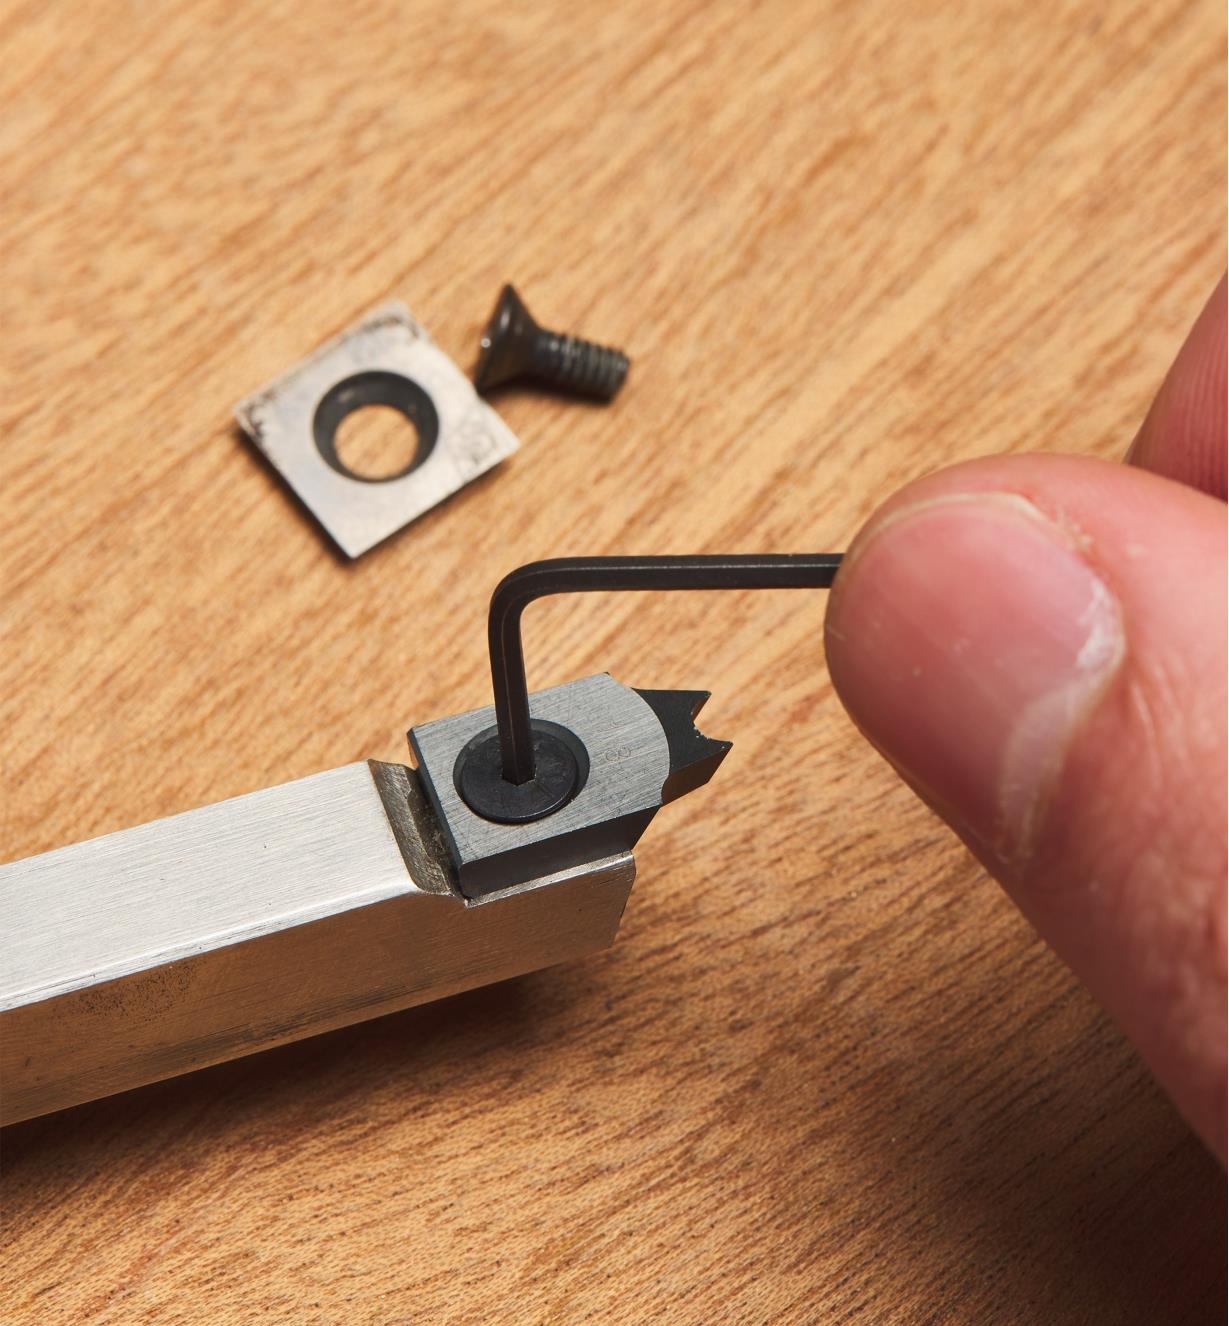 Using a screwdriver to tighten the screw of the negative-rake beading cutter